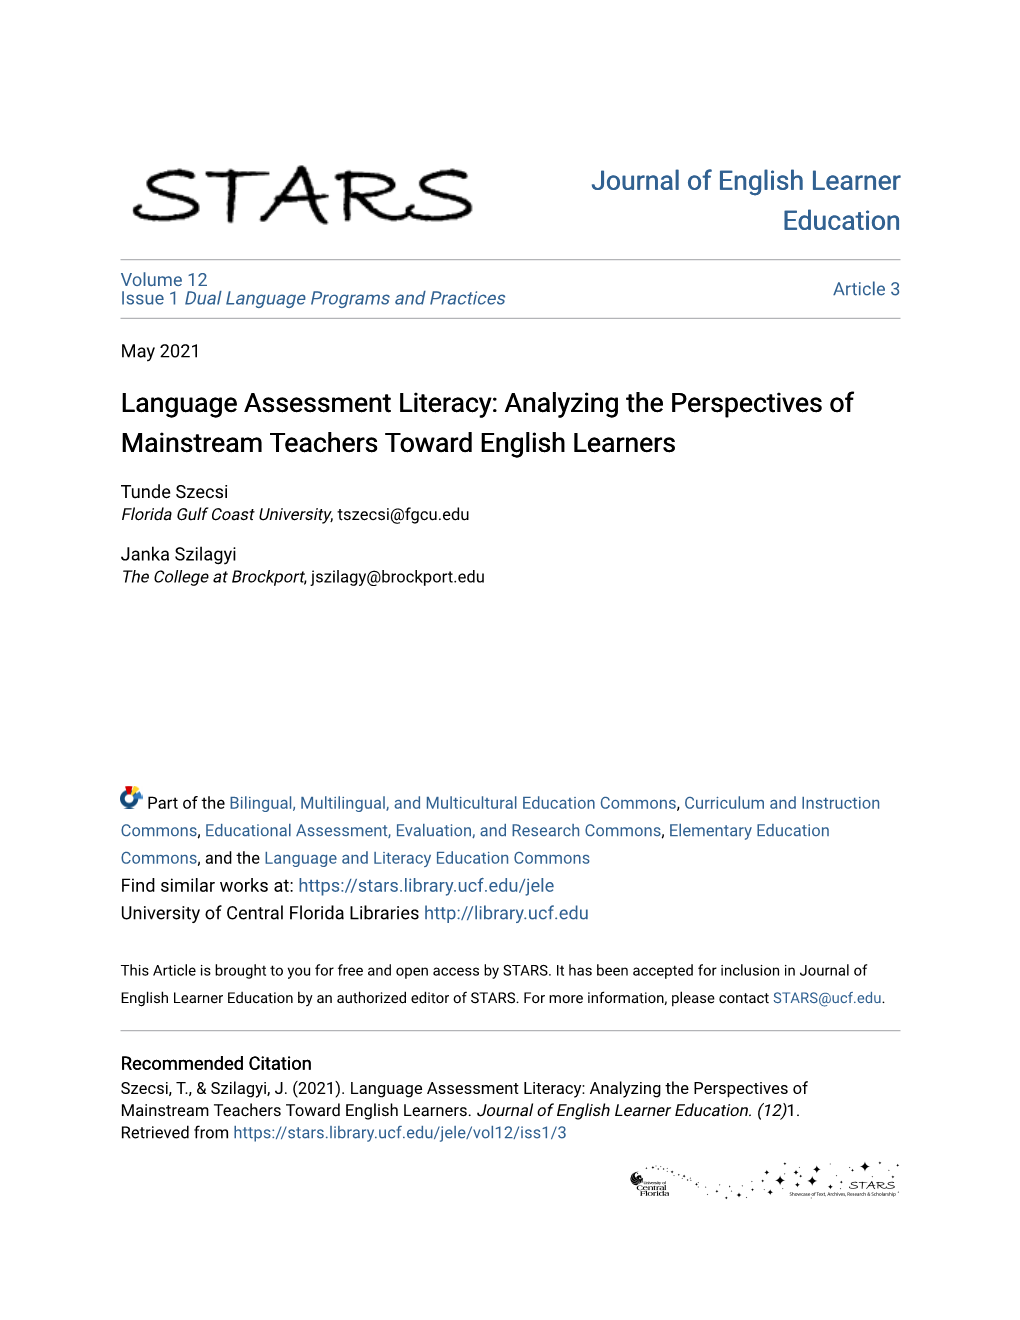 Language Assessment Literacy: Analyzing the Perspectives of Mainstream Teachers Toward English Learners